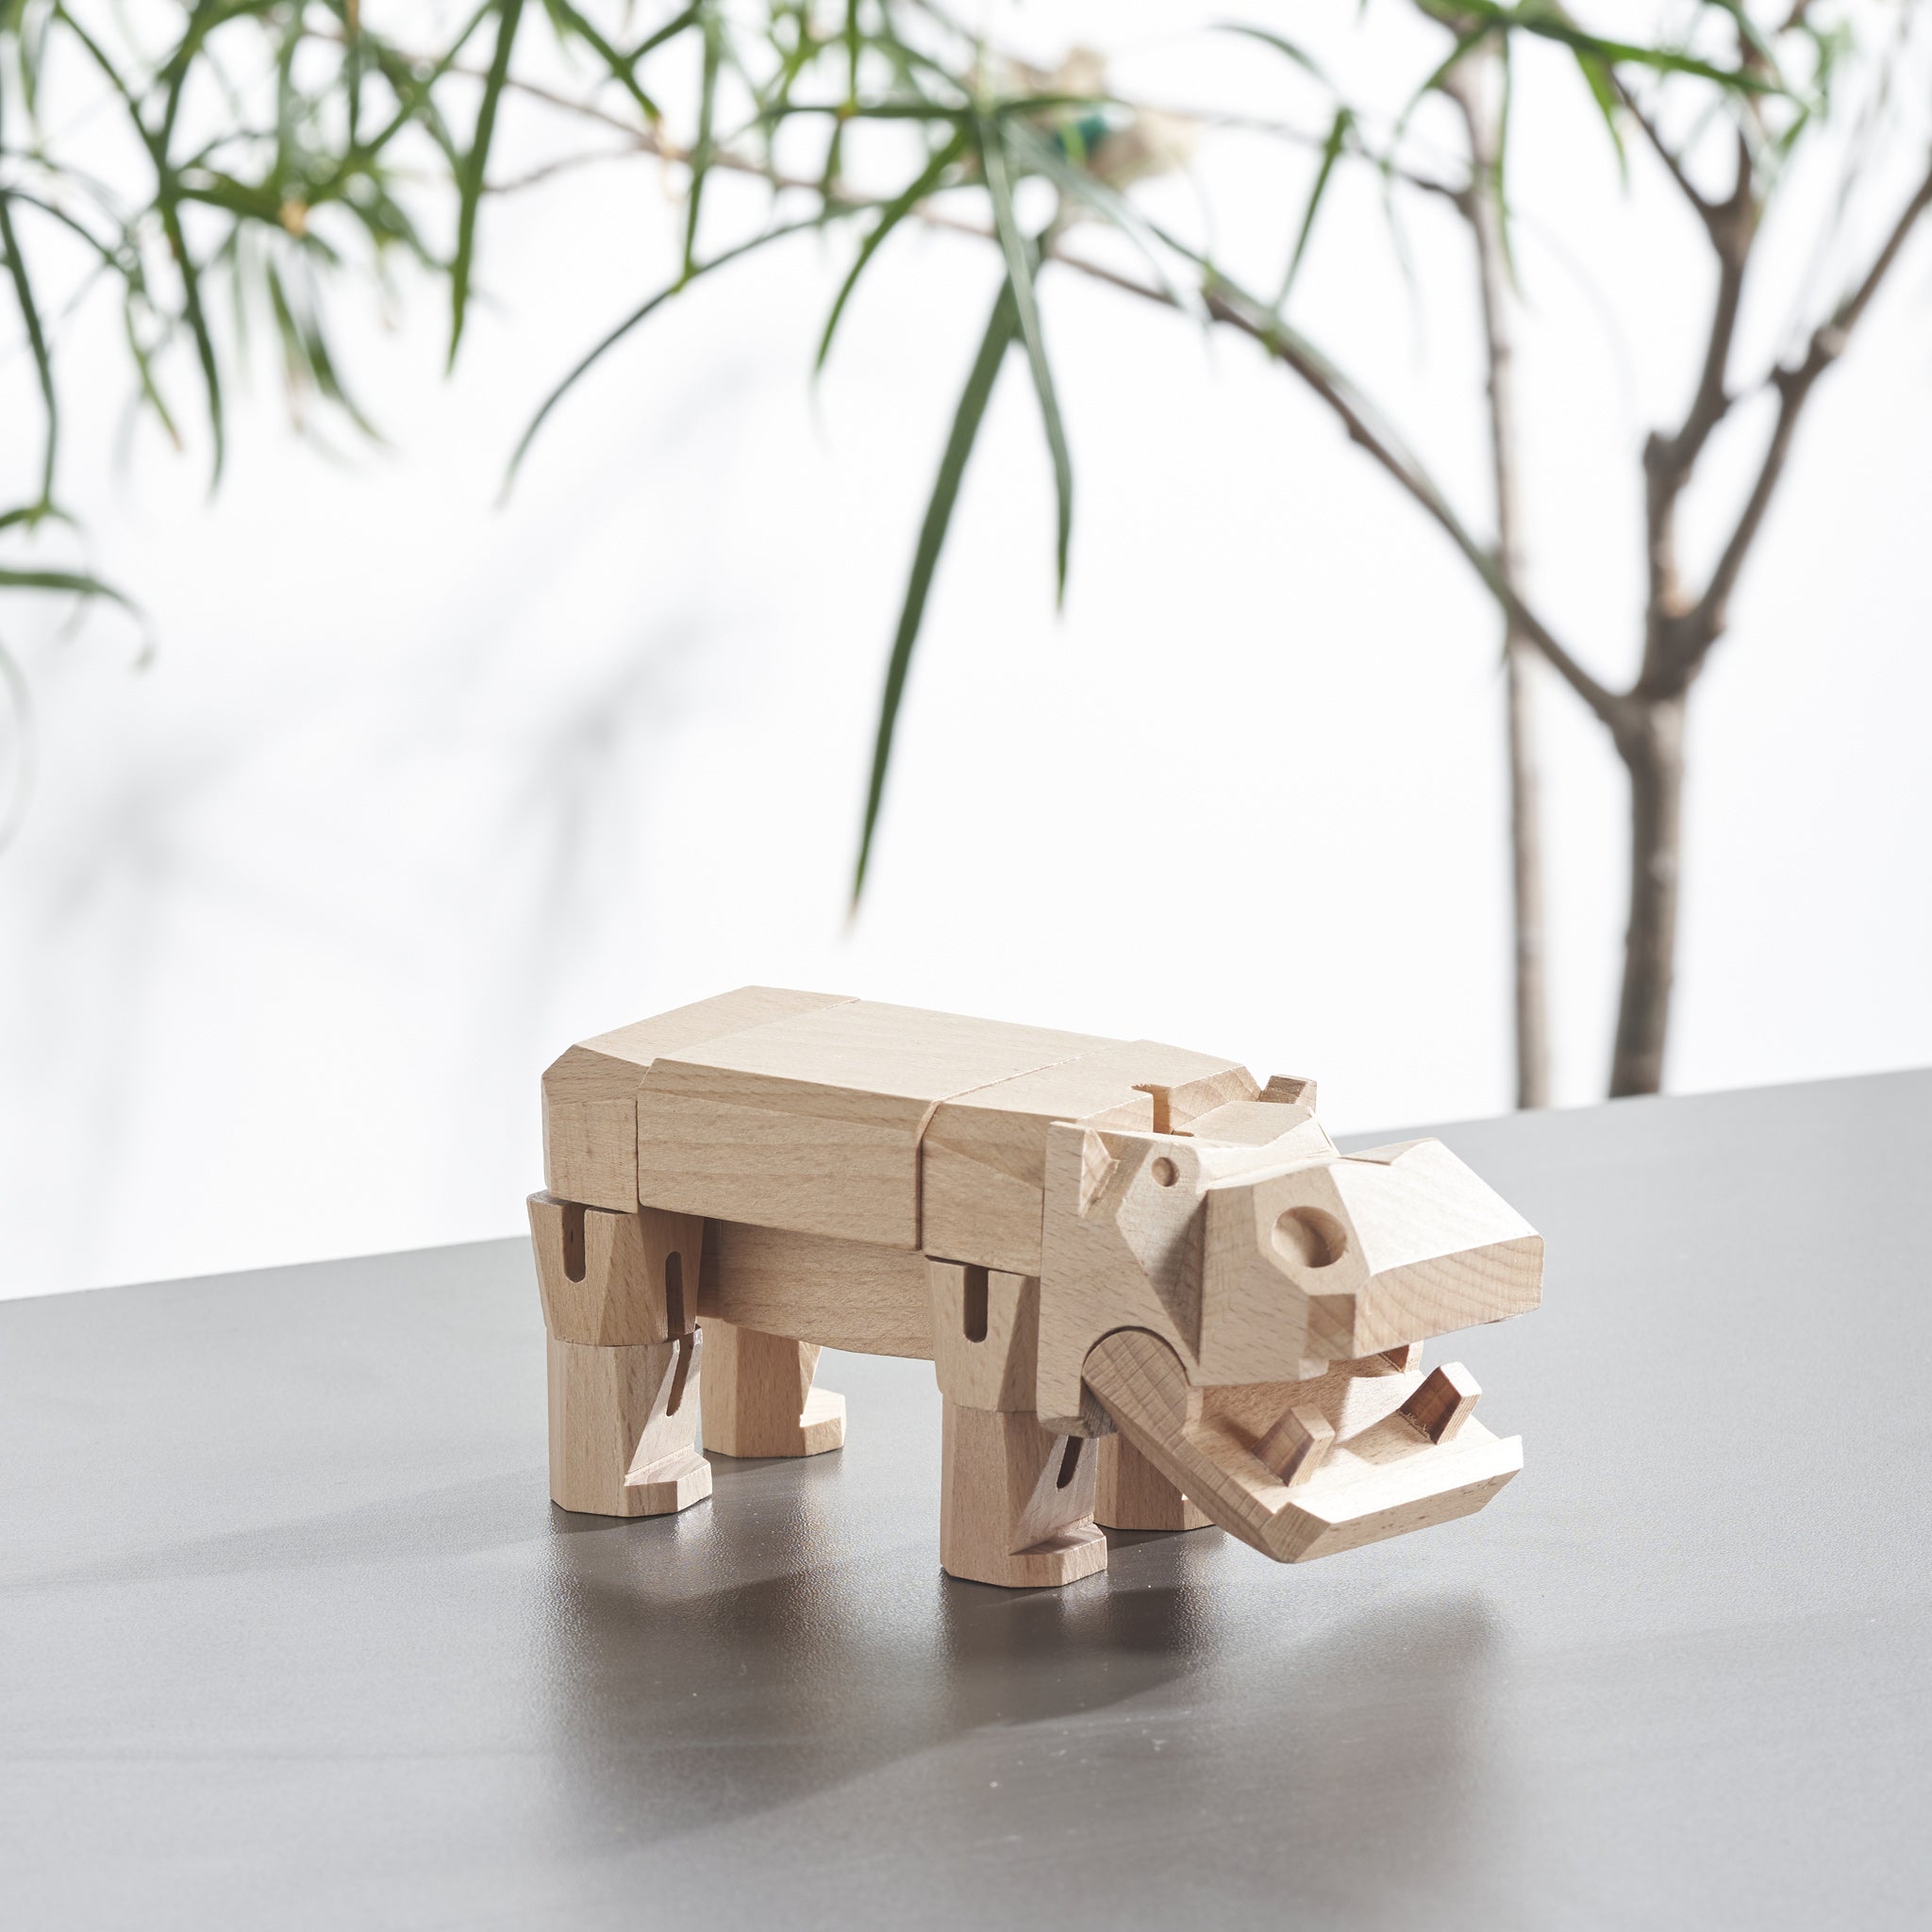 Morphits ® Hippo Wooden Toy: Explore the Wild with Poseable Wooden Playset Friends - Yoshiaki Ito Design Stand N3